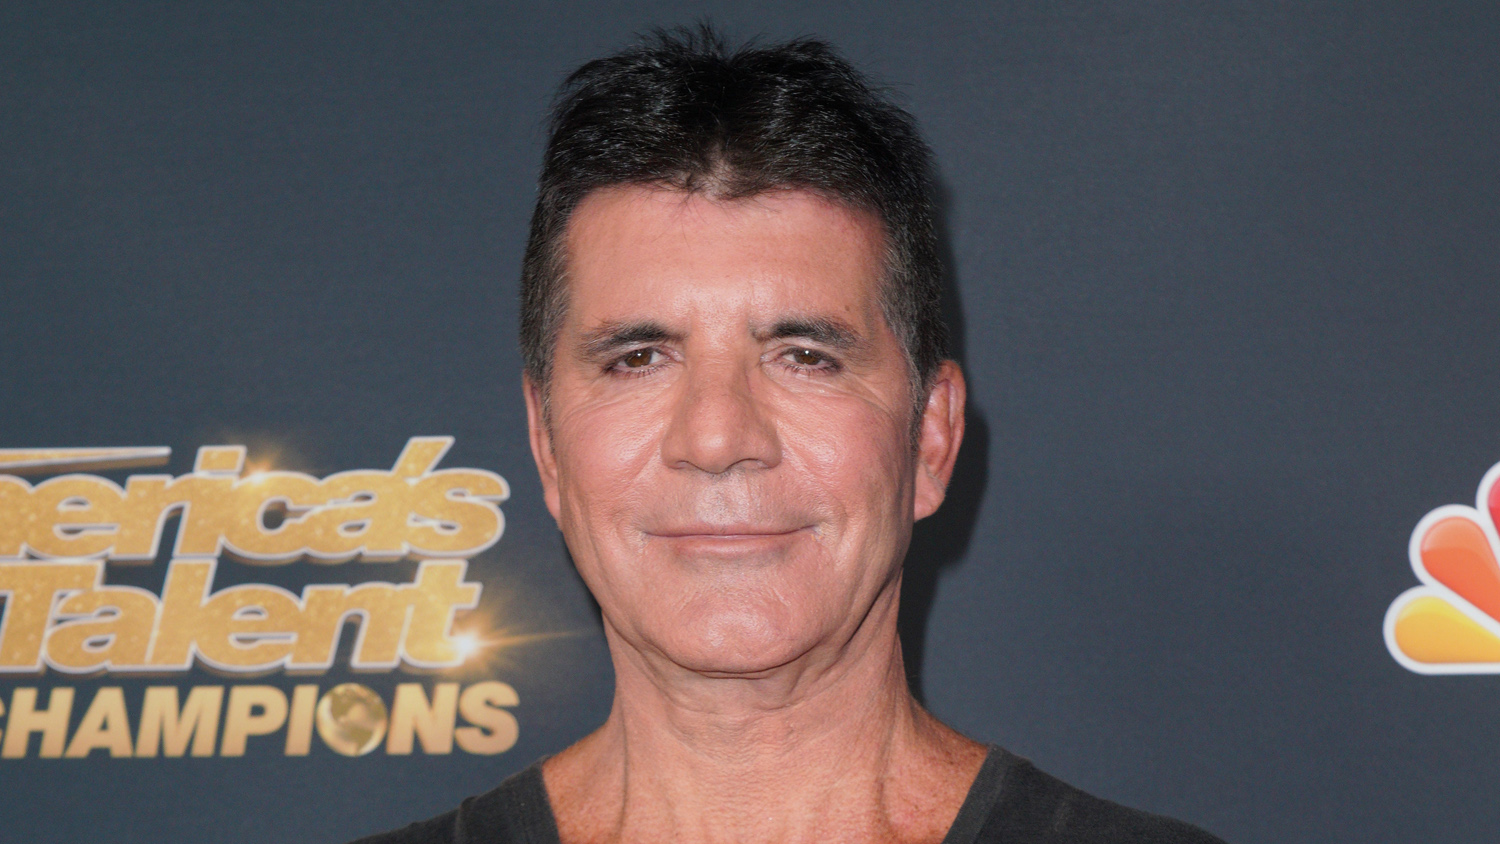 simon cowell accident back injury